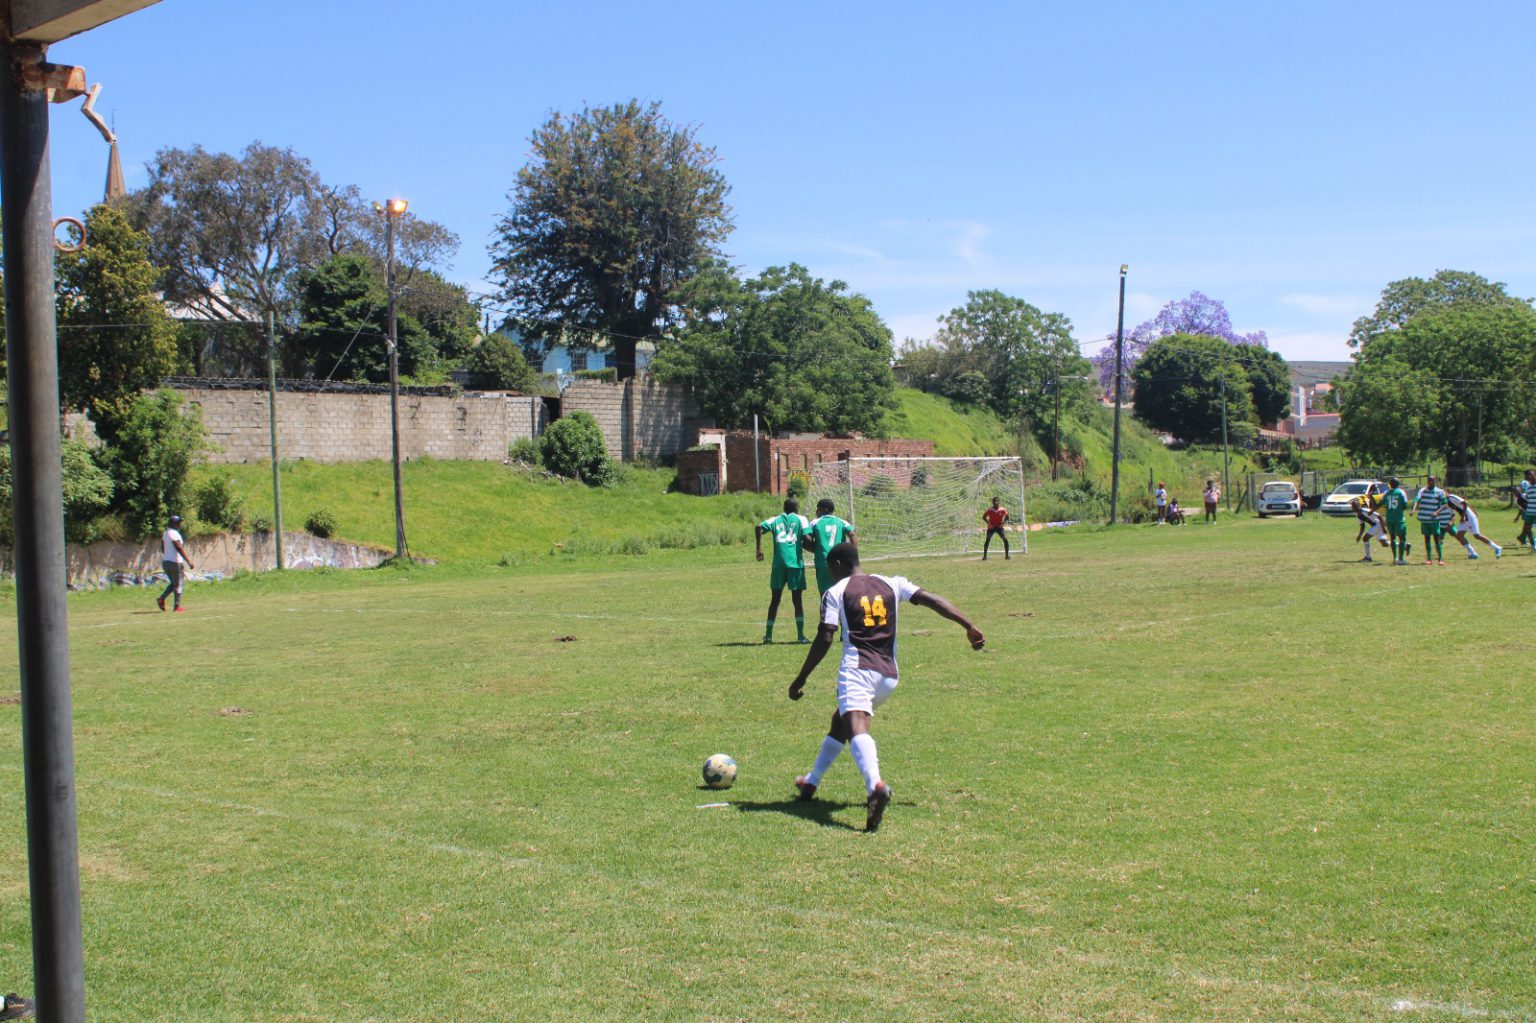 Junior Sundowns in black against Young eagles in green in the regional league clash